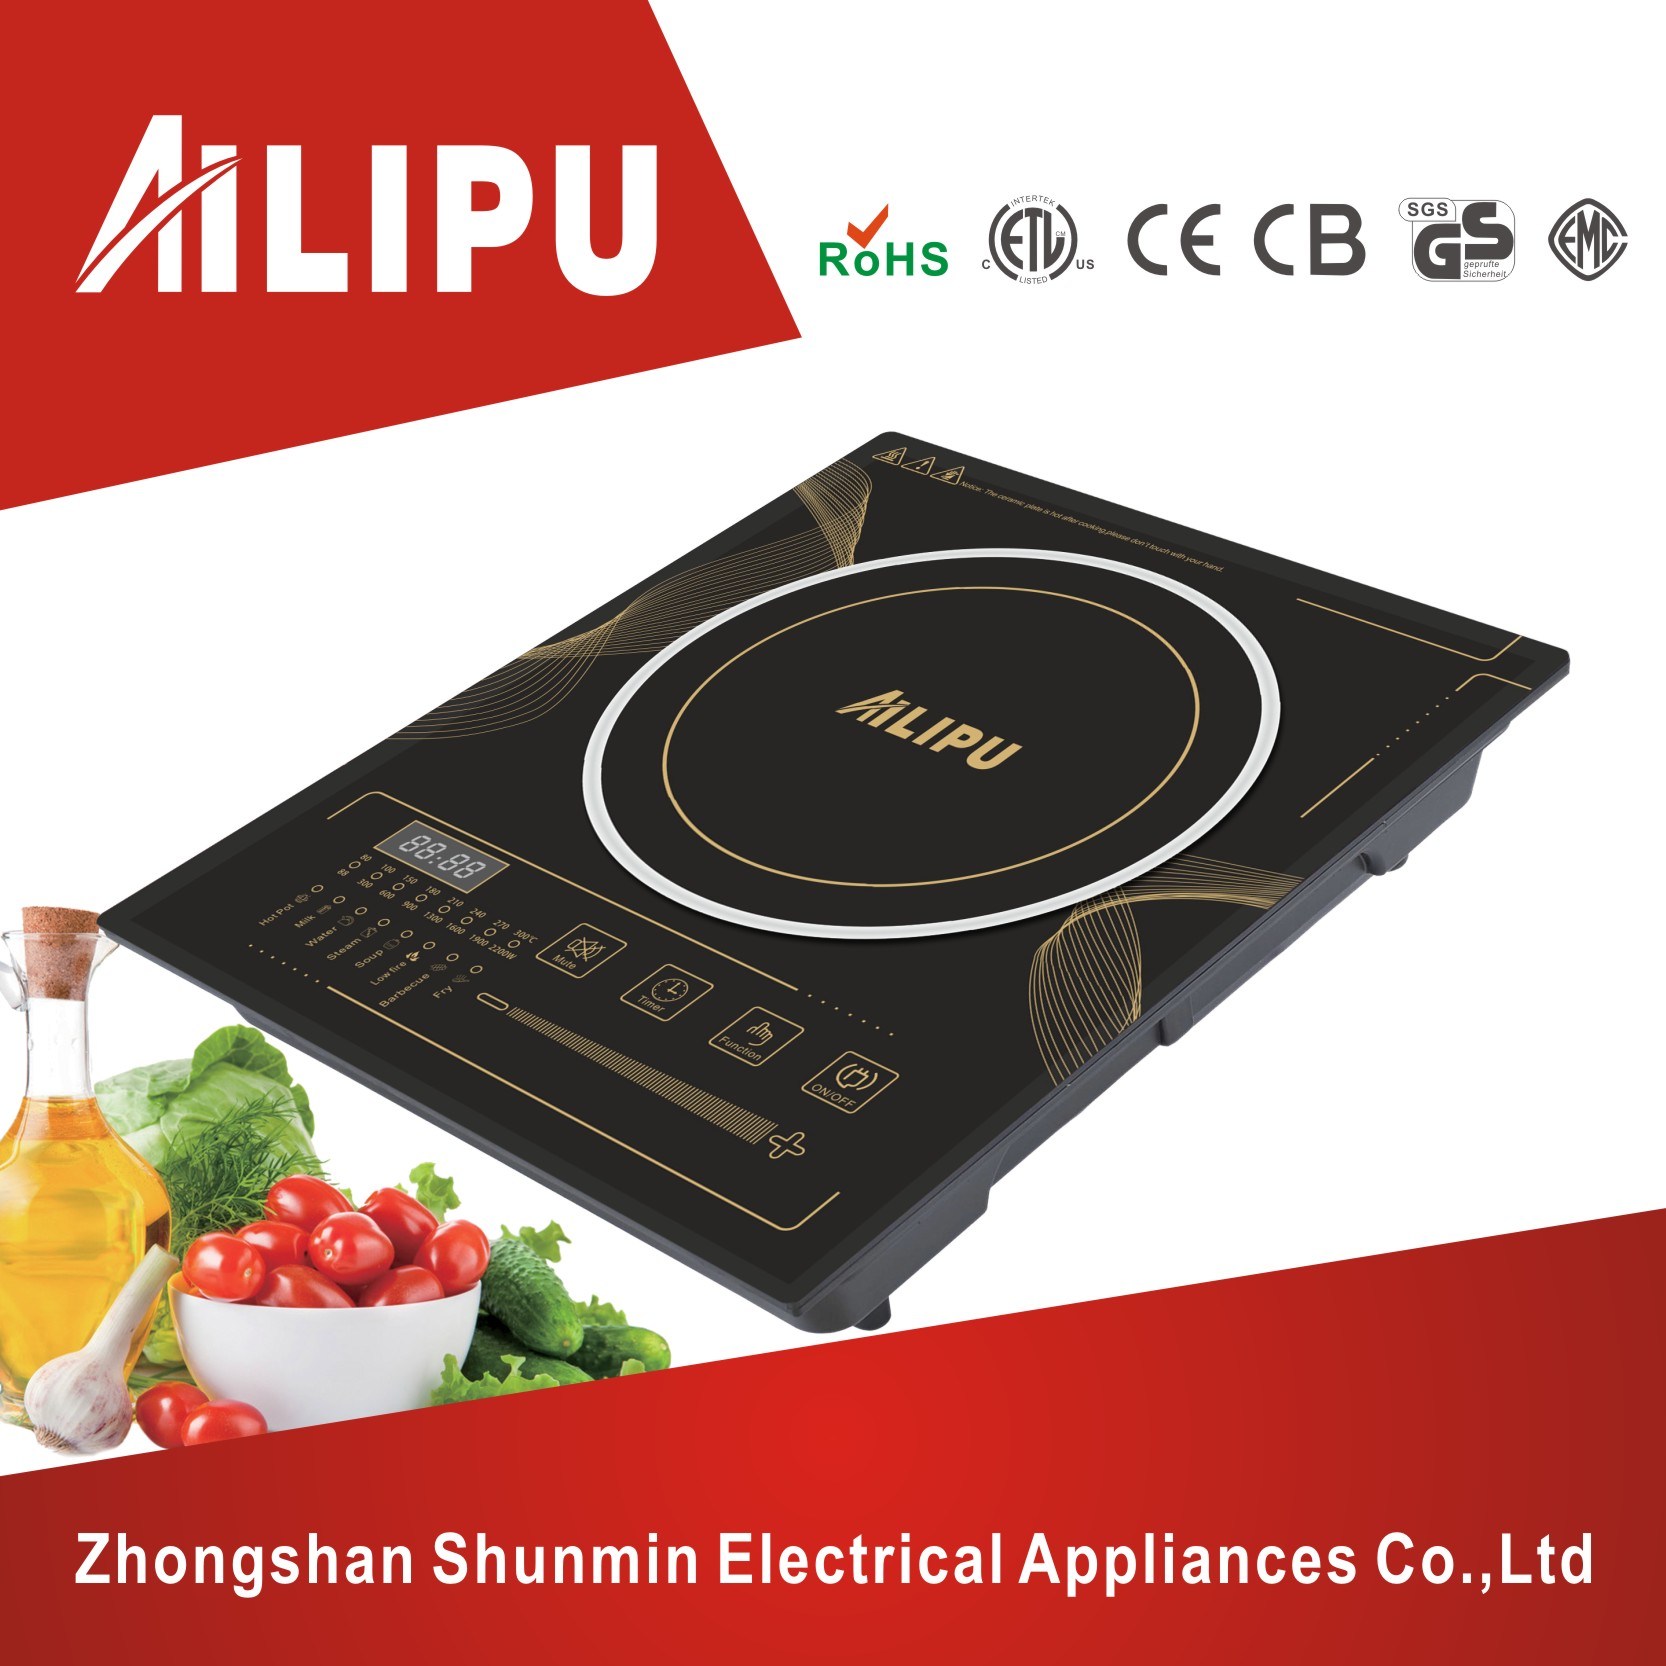 Sliding Touch Control and Multi-Function ABS Housing Electric Induction Stove, Induction Cooker